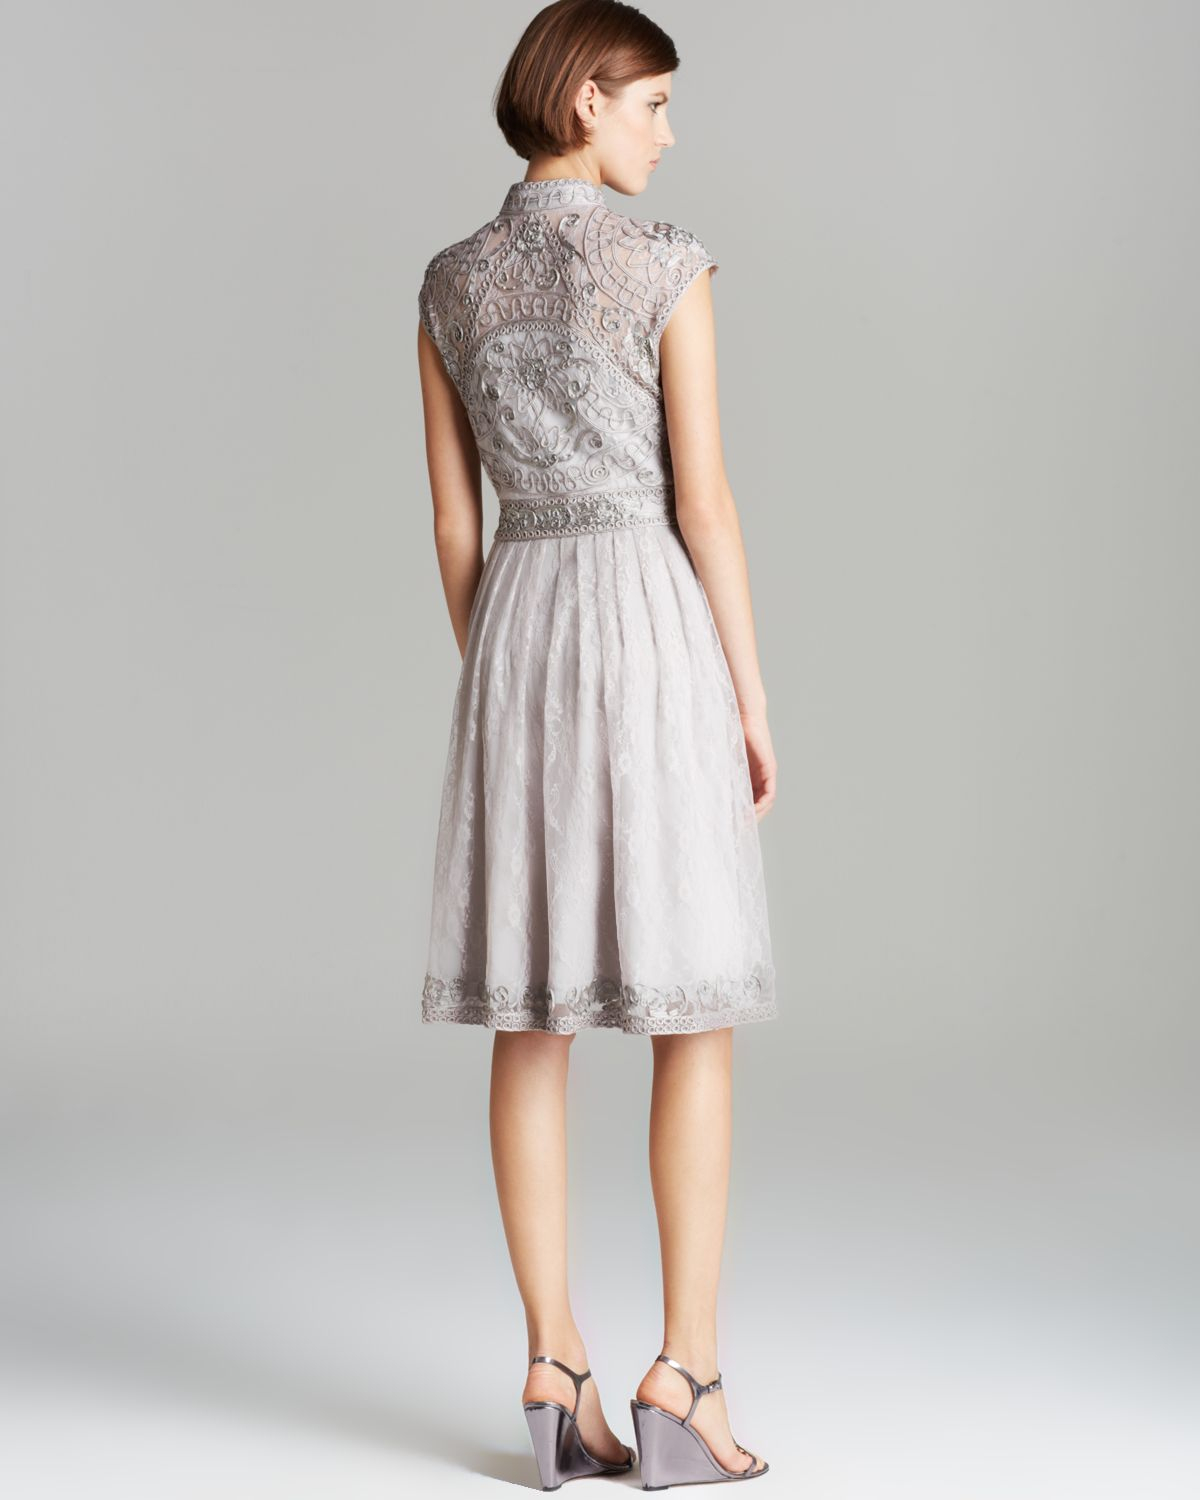 Lyst - Sue wong Dress High Neck Mandarin Collar Lace Fit and Flare in Gray